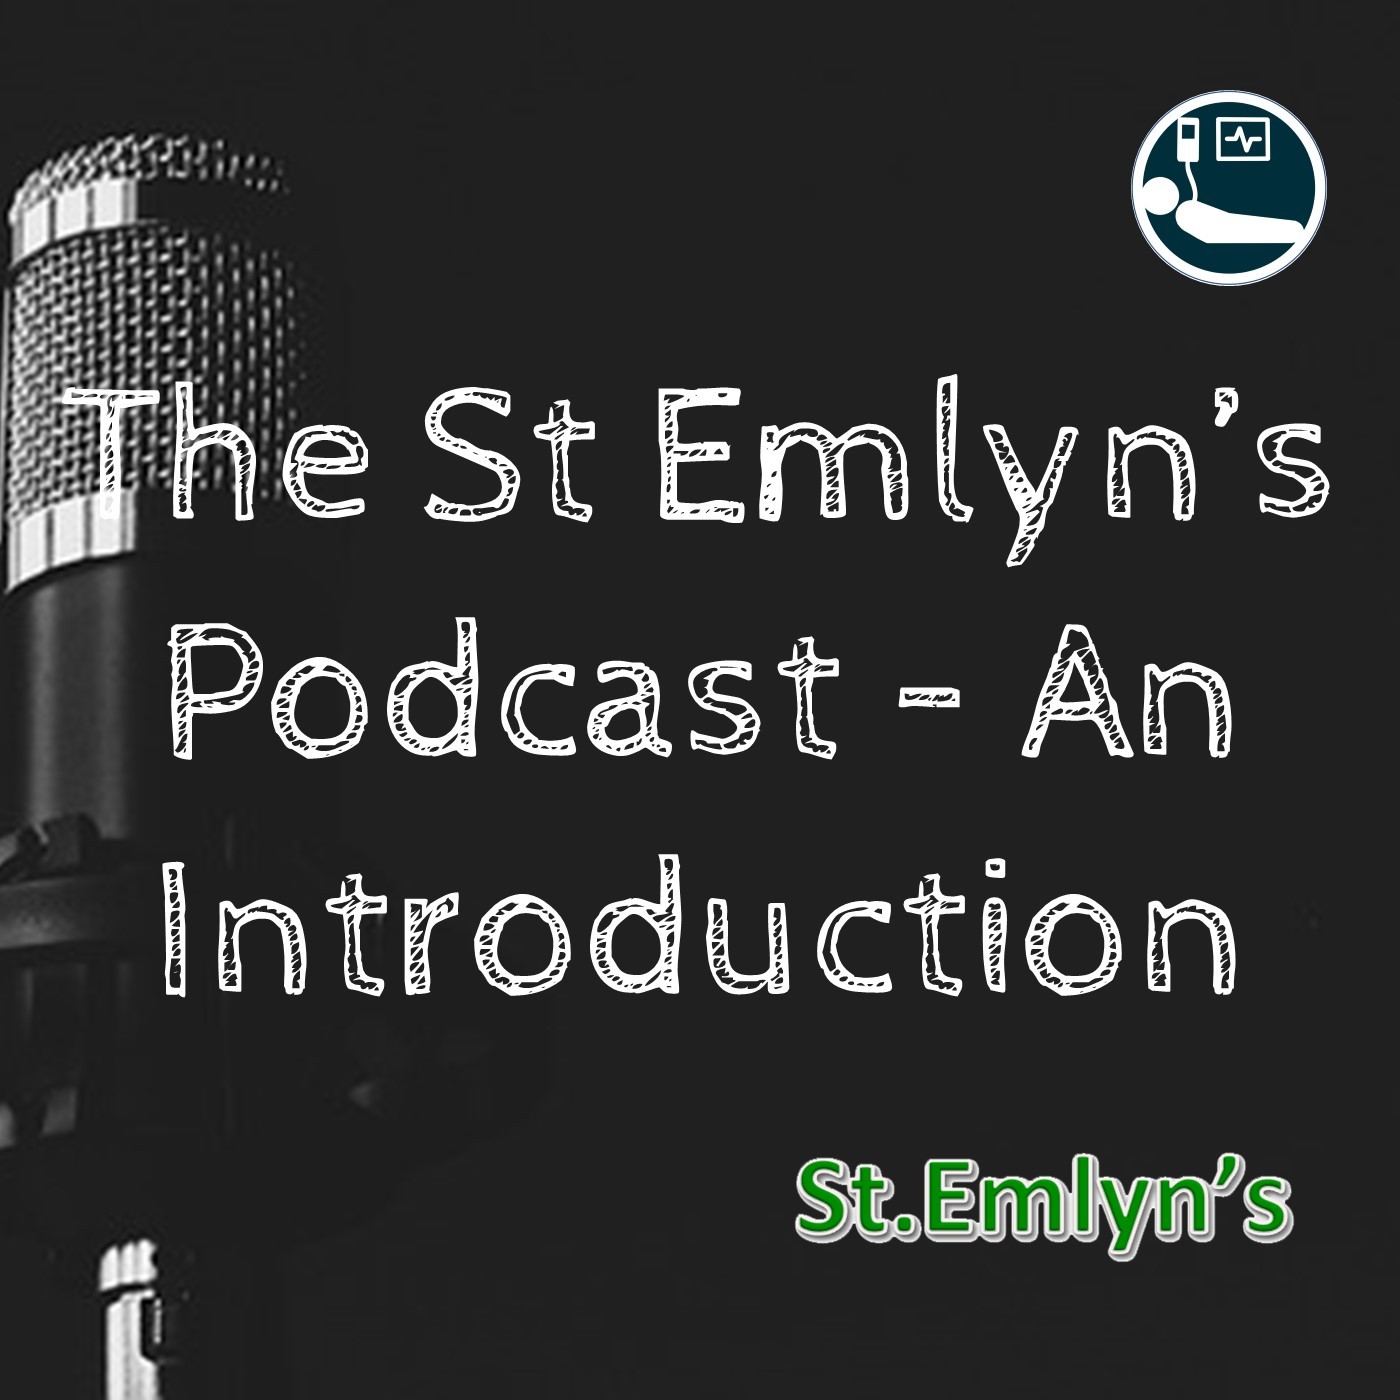 Ep 1 - St.Emlyn’s The Podcast - An Introduction